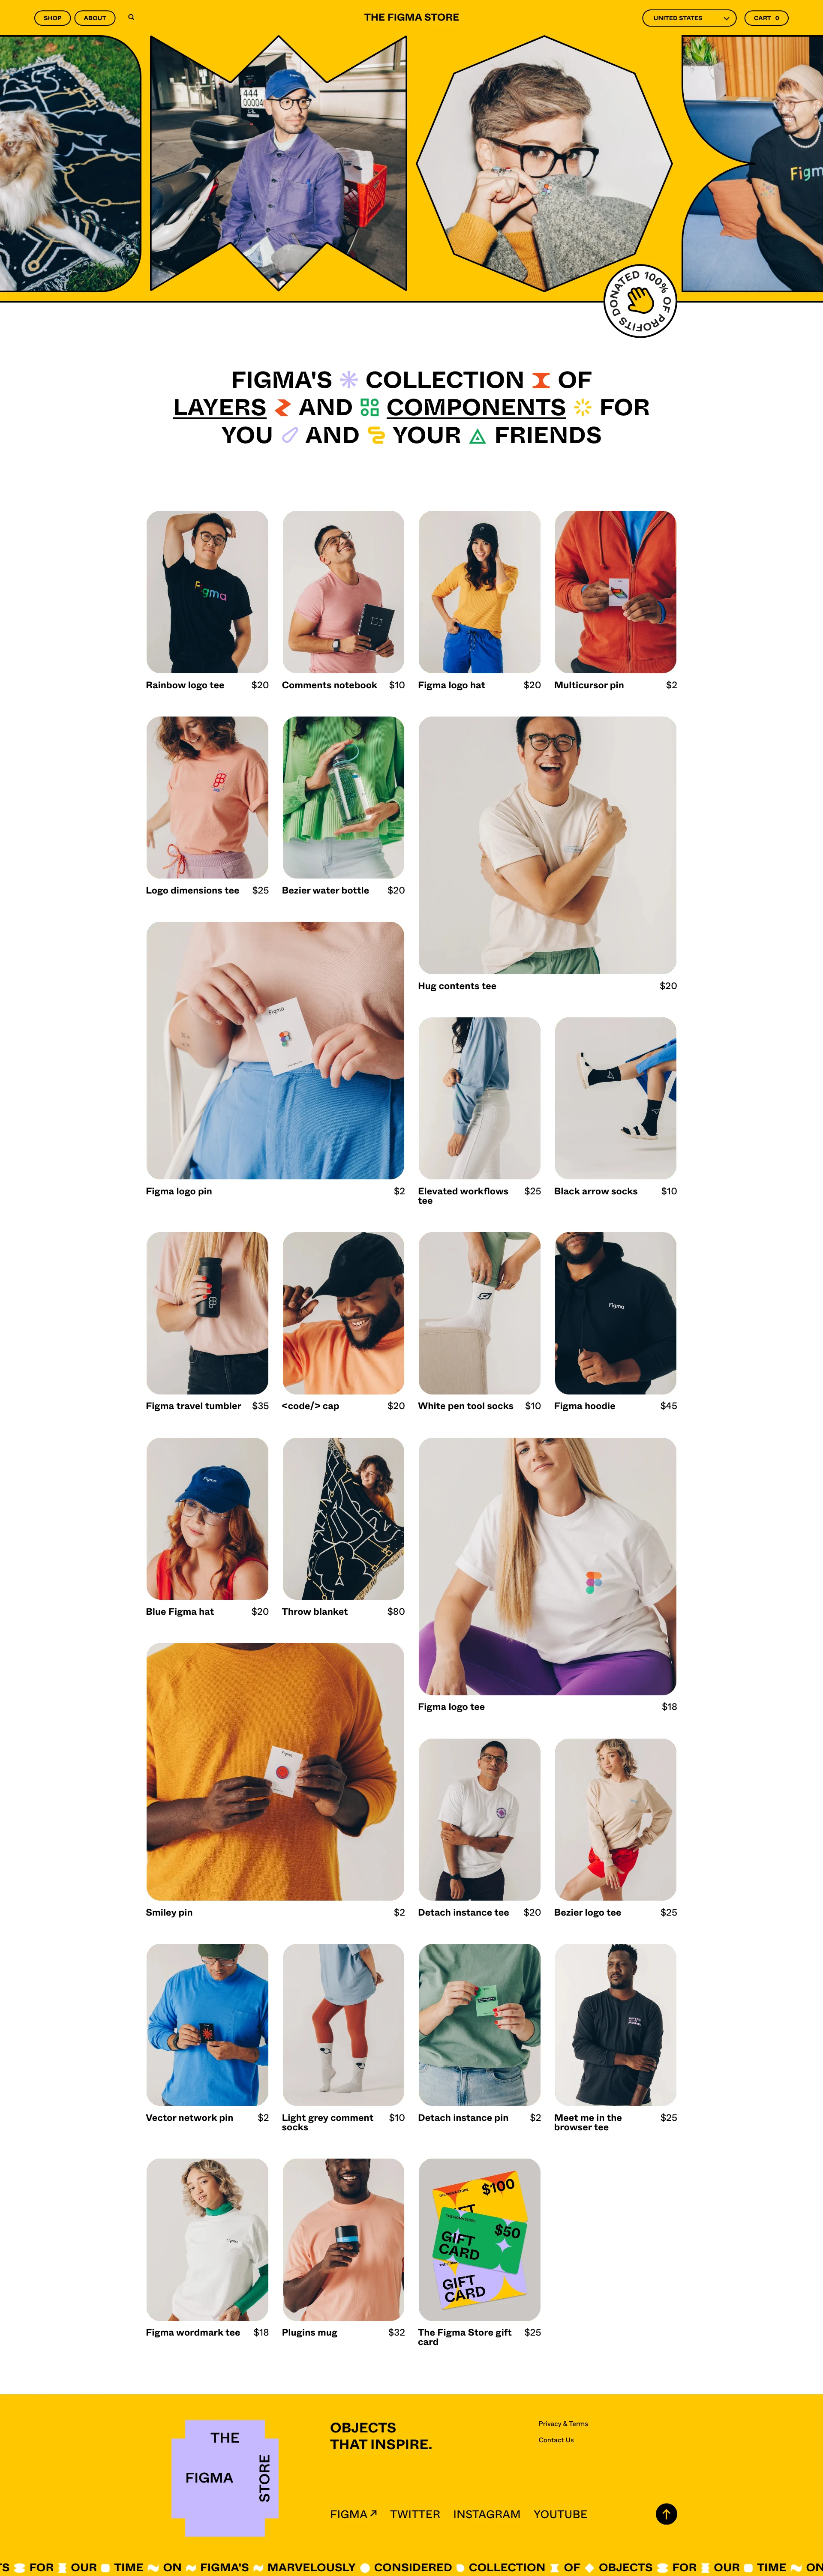 The Figma Store Landing Page Example: Figma's collection of Layers and Components for you and your friends.